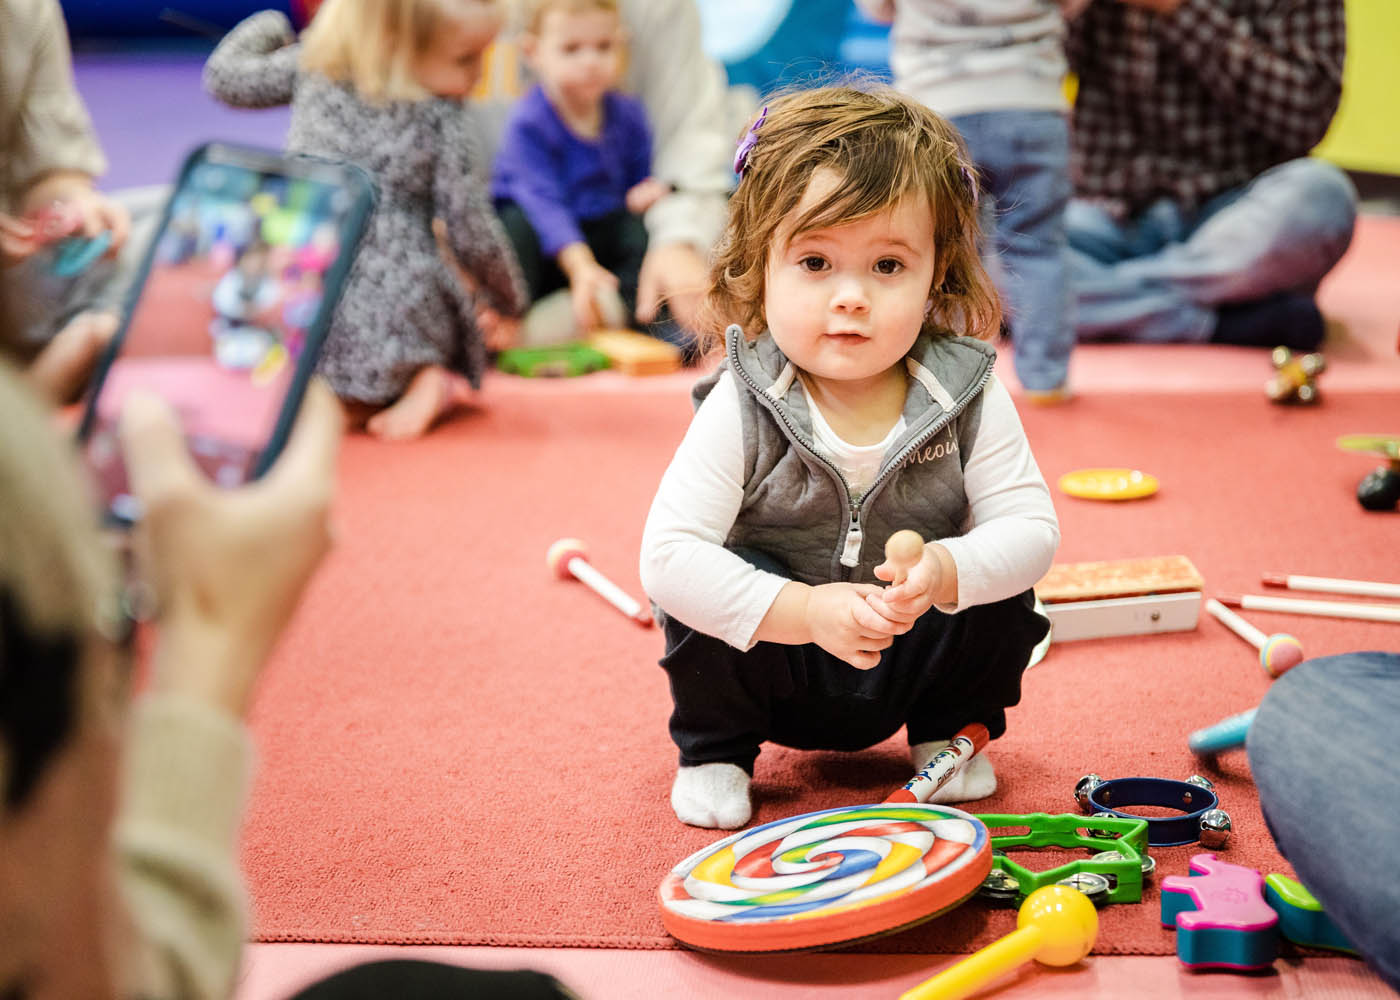 An adorable girl playing with musical instruments, an excellent activity for kids at Romp n' Roll Willow Grove birthday parties.